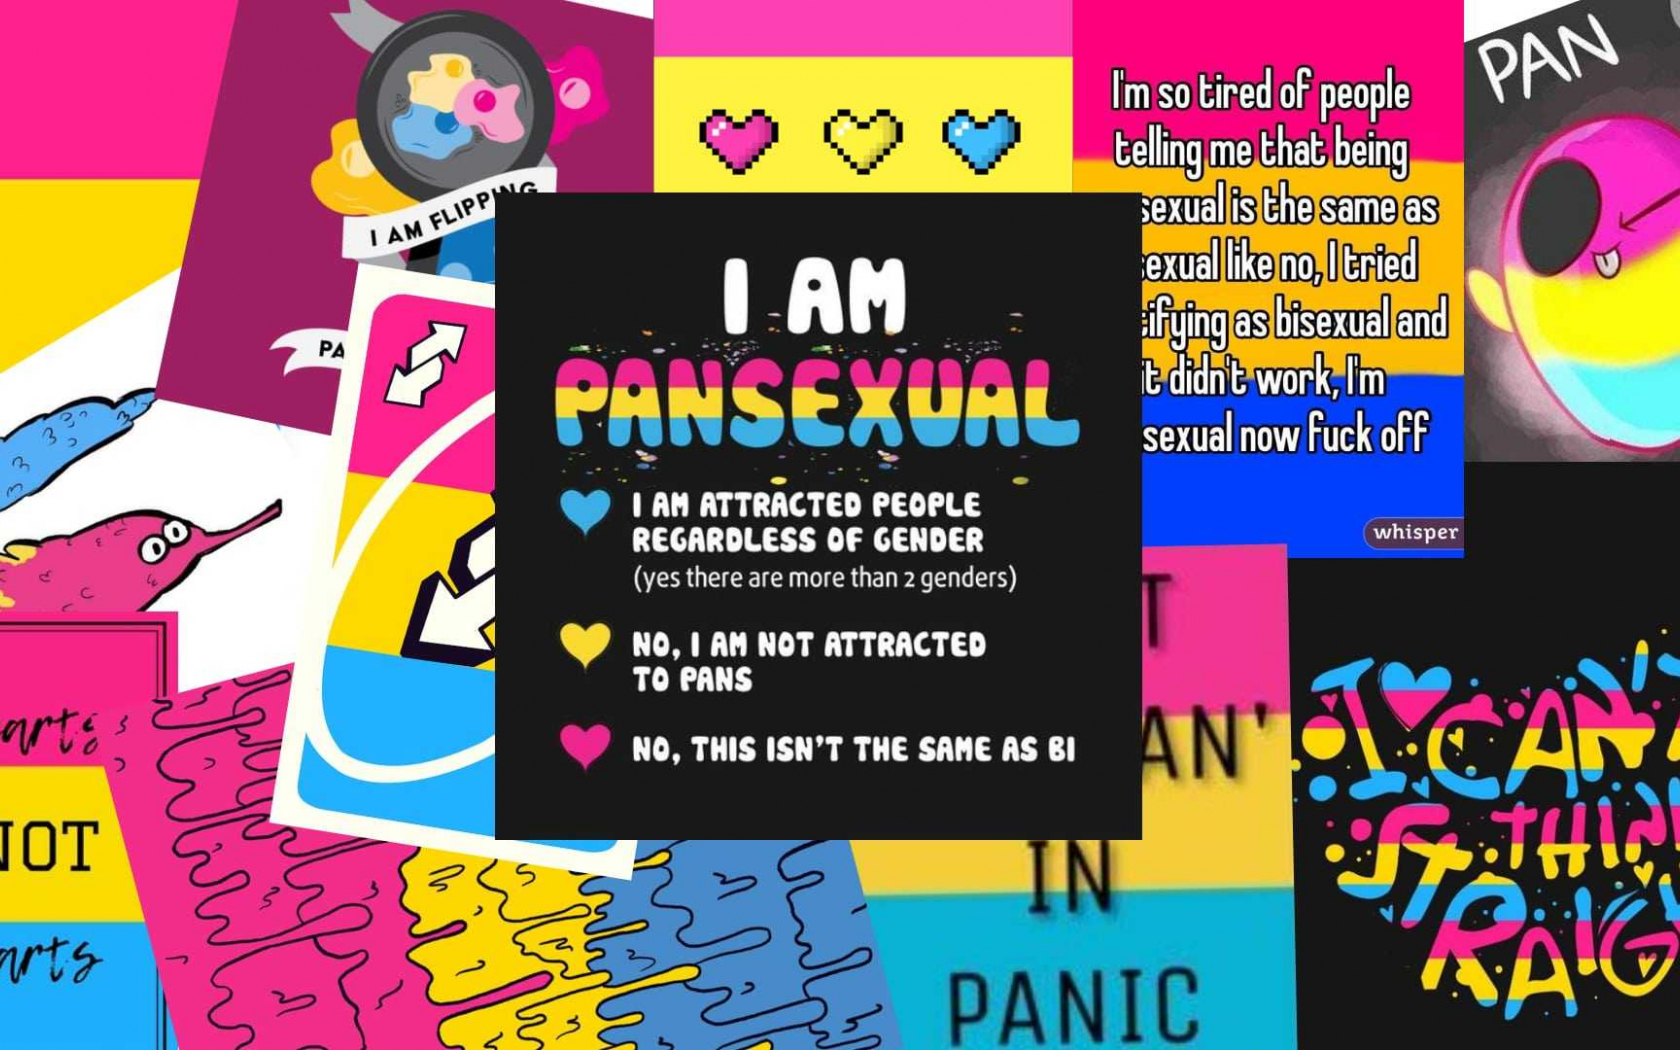 Pansexual wallpaper with different pansexual affirmations and a black background - Pansexual